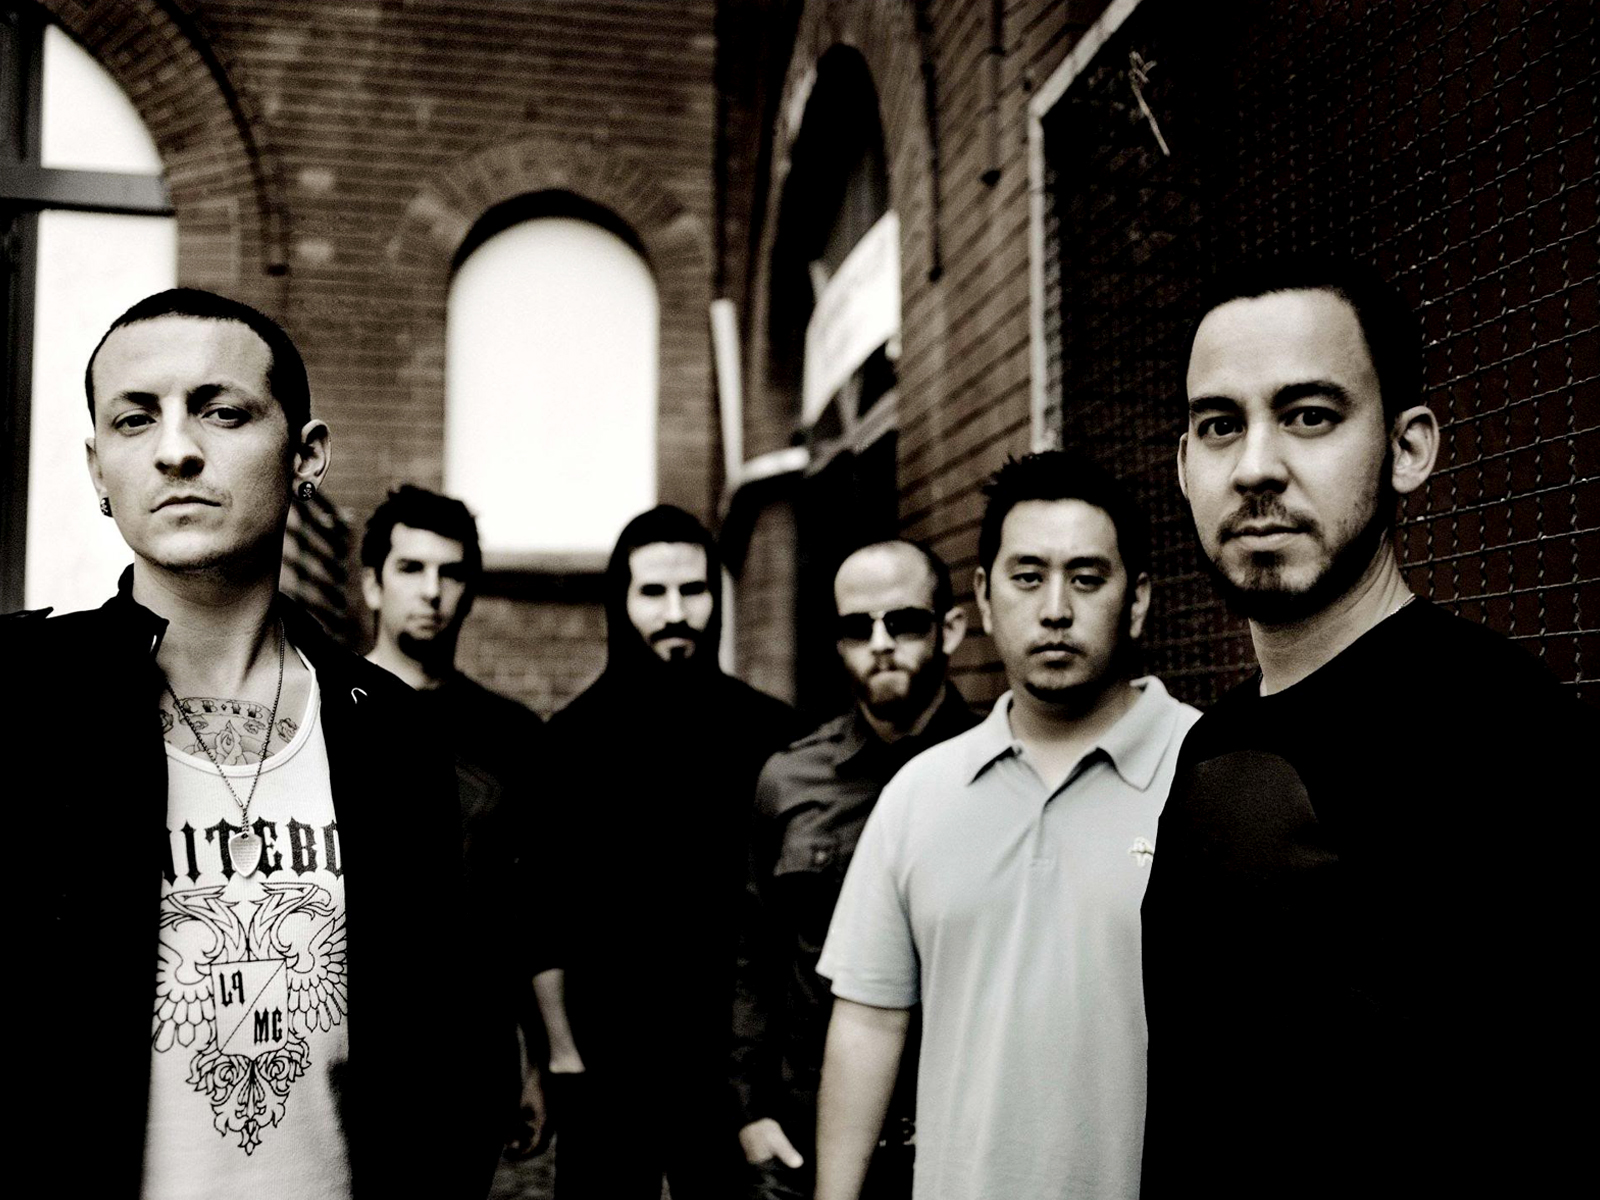 linkin park wallpaper hd,social group,monochrome,black and white,photography,event